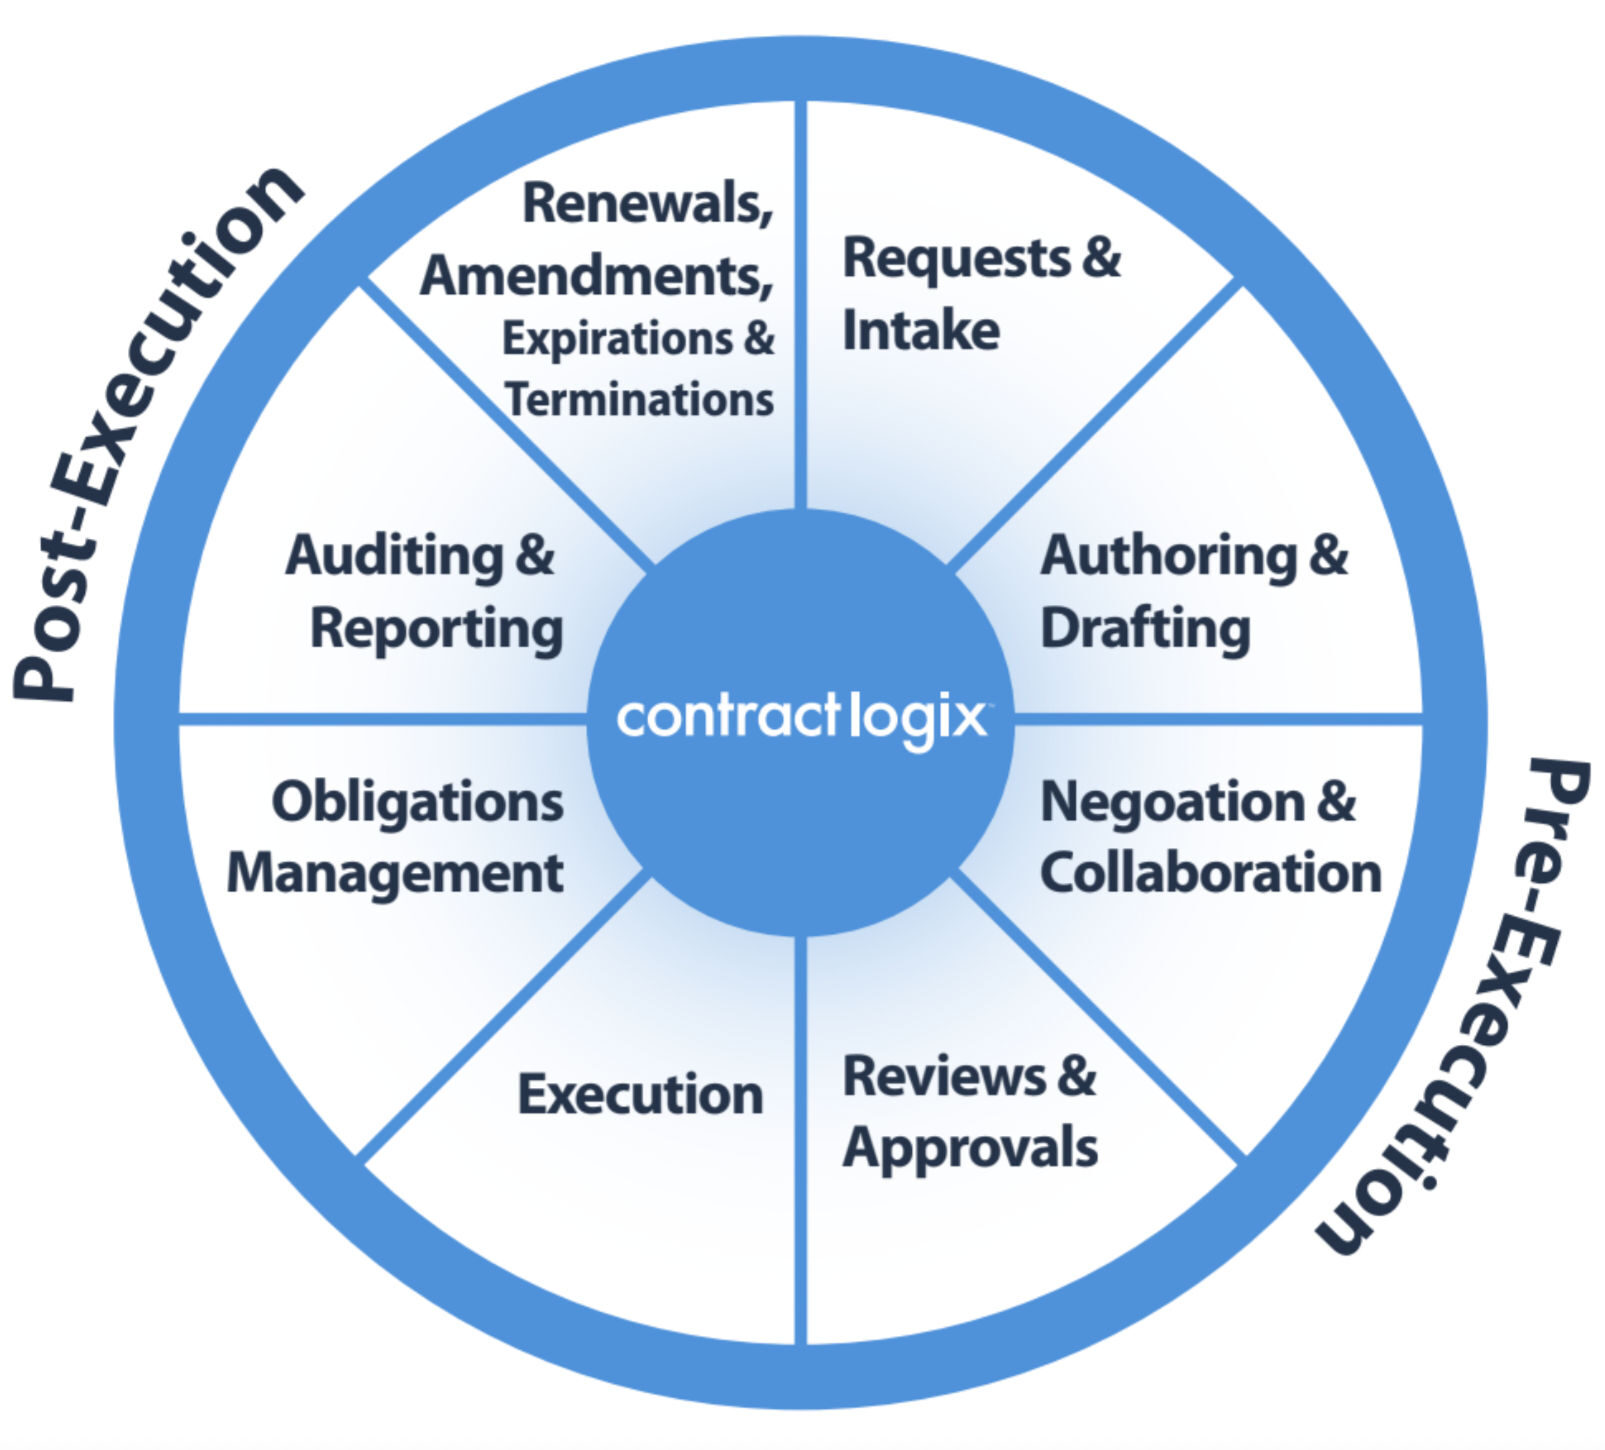 graphic shows the stages and phases of contract lifecycle management